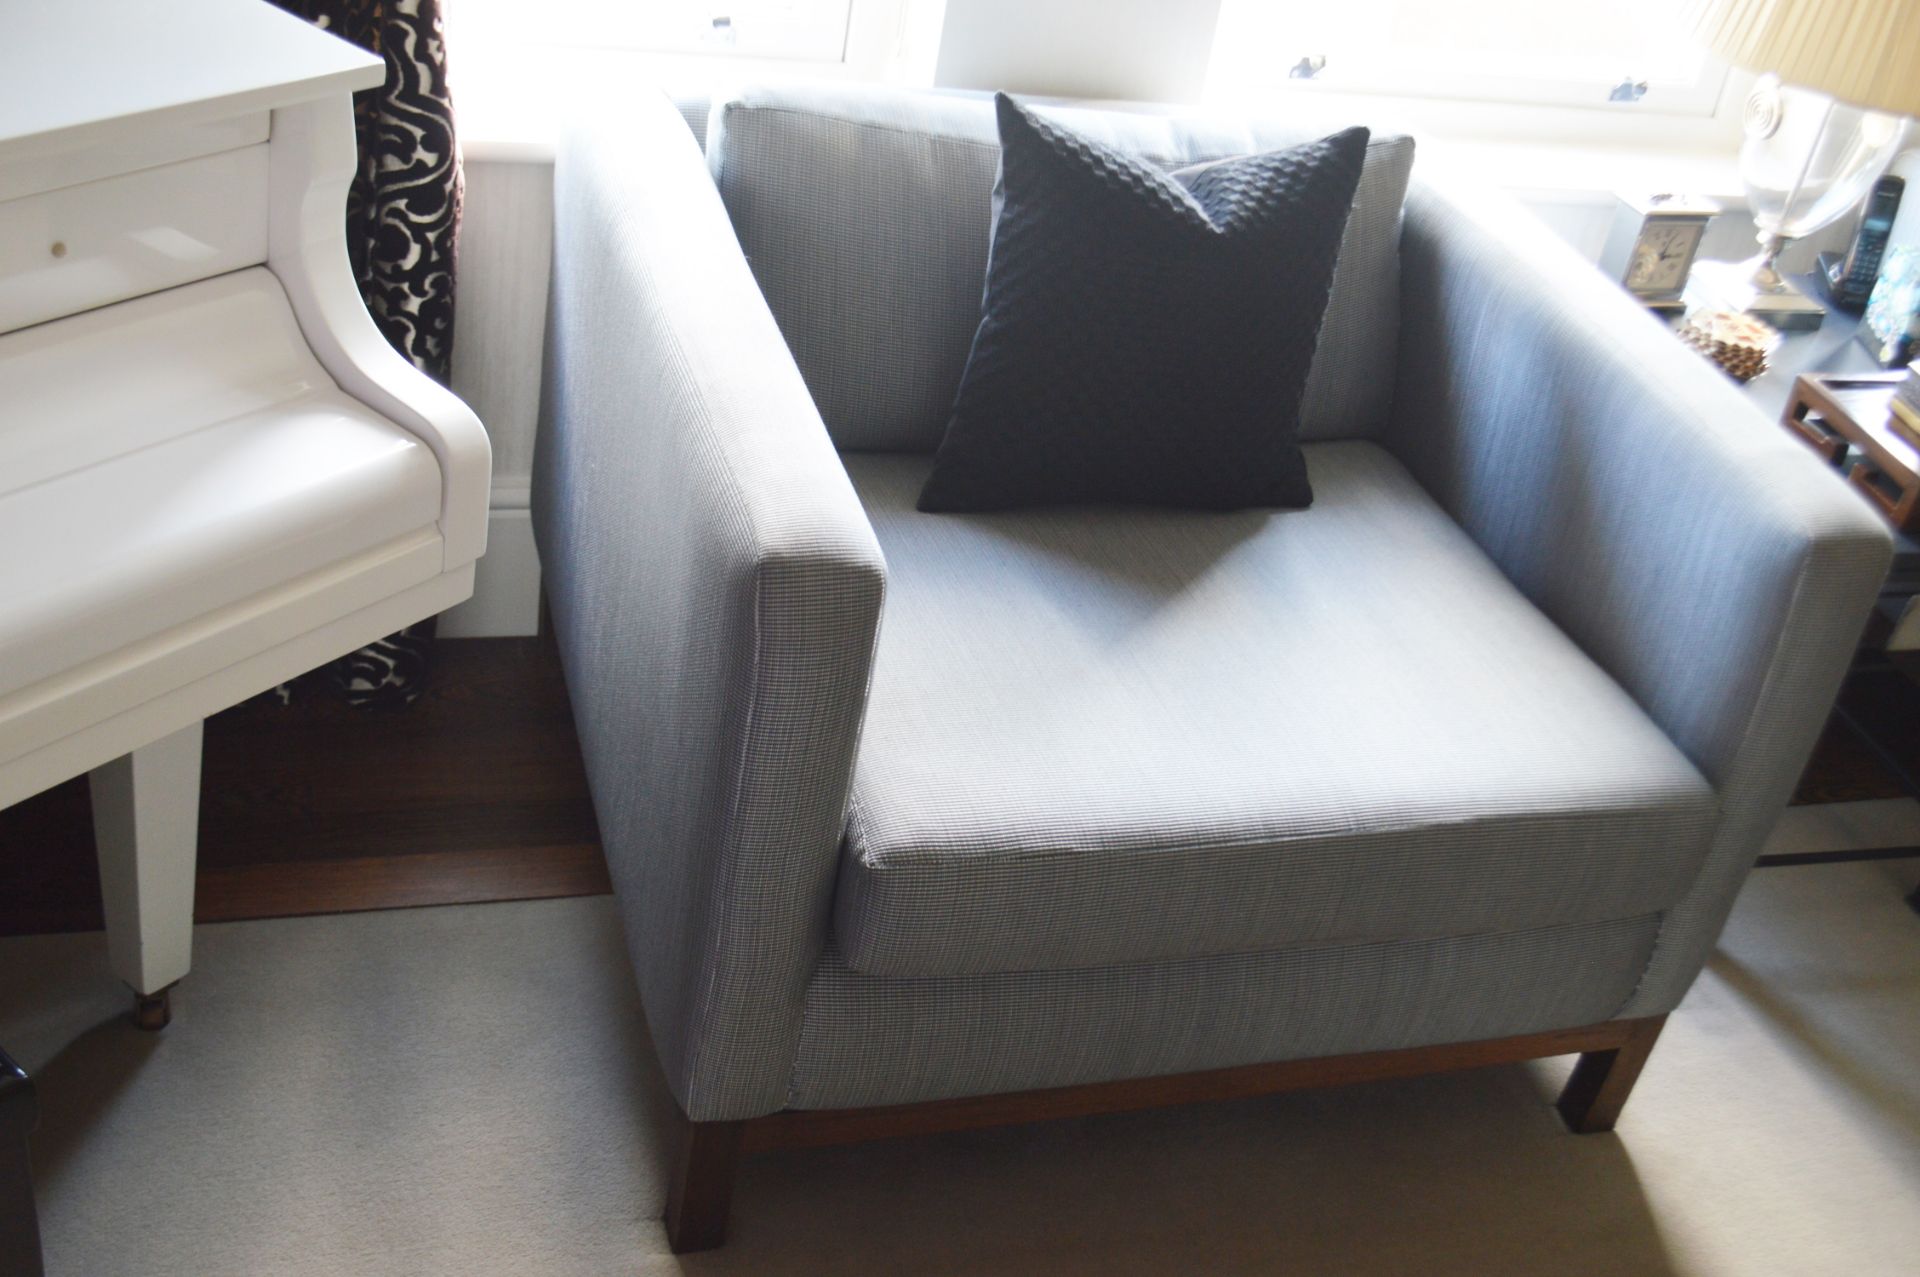 2  x Contemporary Armchairs - To Be Removed From An Exclusive Property In Bowdon  - CL691 - - Image 3 of 4